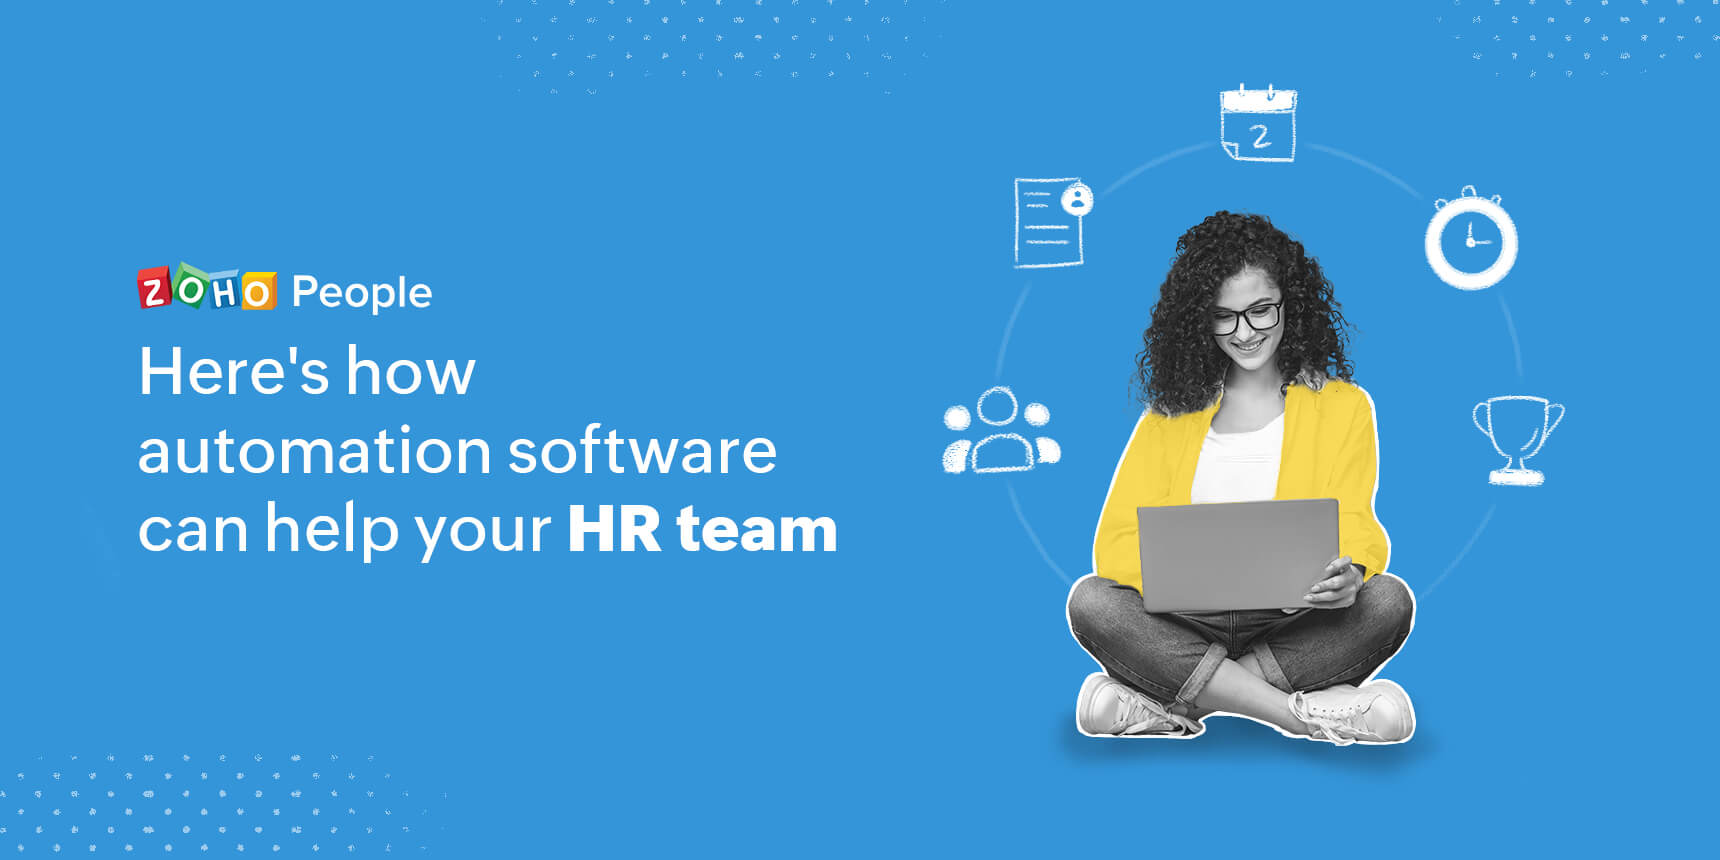 What can automation software do for hr professionals?